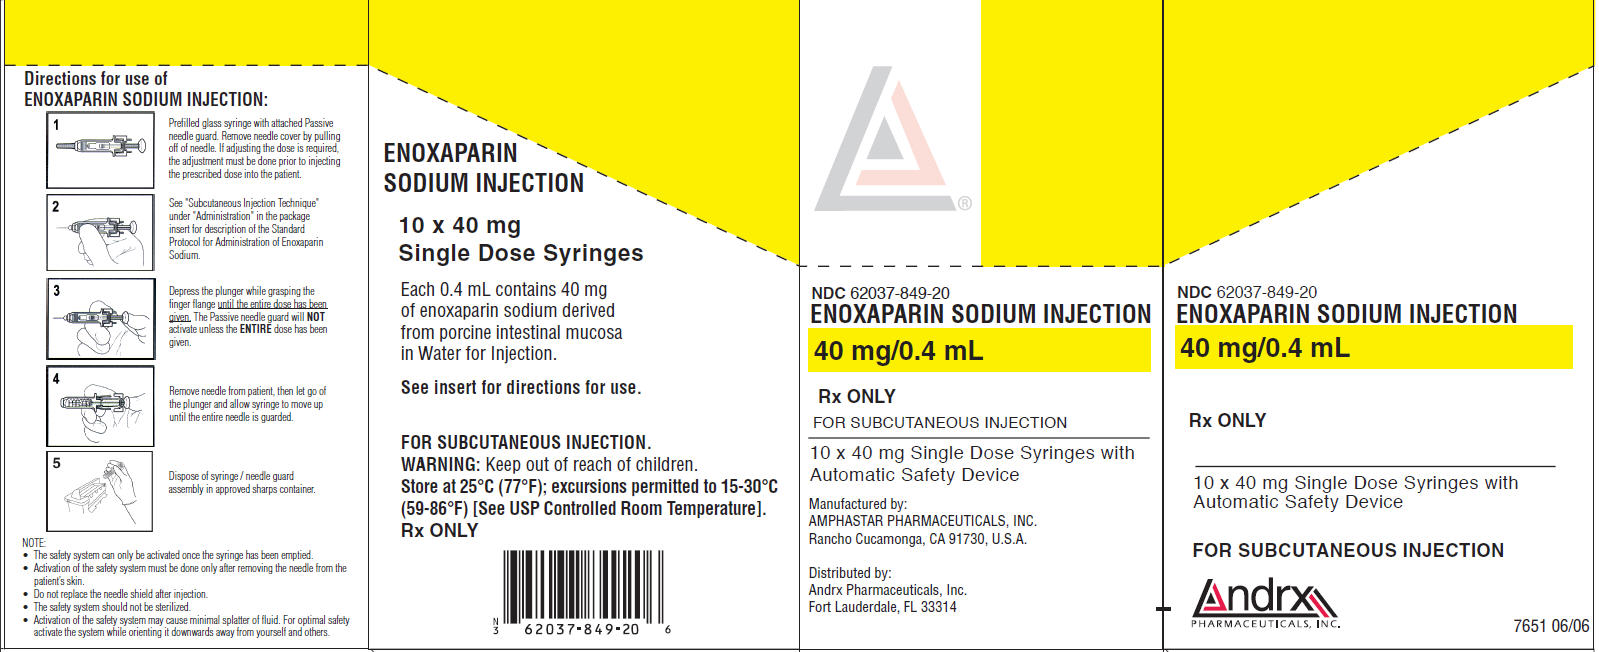 NDC 62037-849-20 ENOXAPARIN SODIUM INJECTION 40 mg/0.4 mL Rx ONLY FOR SUBCUTANEOUS INJECTION 10 x 40 mg Single Dose Syringes with Automatic Safety Device